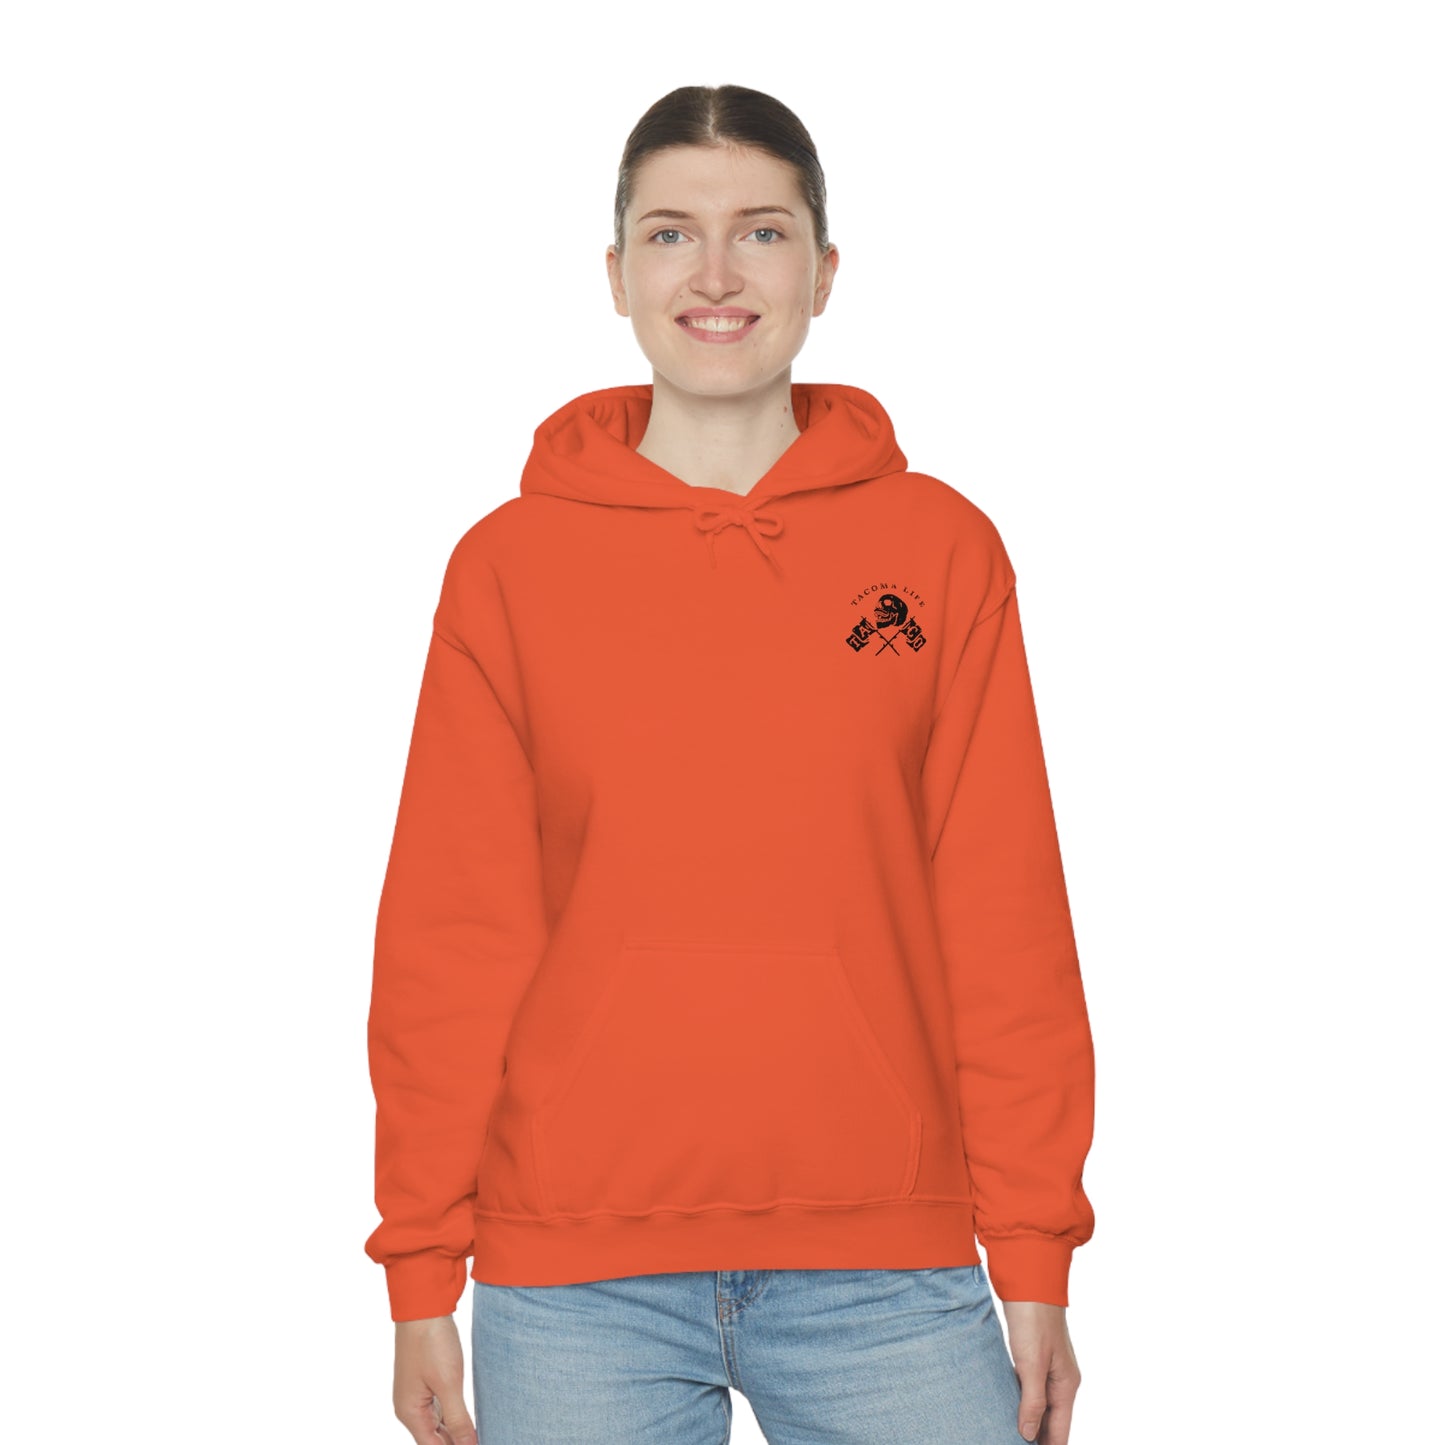 Thrashed Off-Road's Undying Taco Love Hoodie - Mid-Atlantic Off-Roading